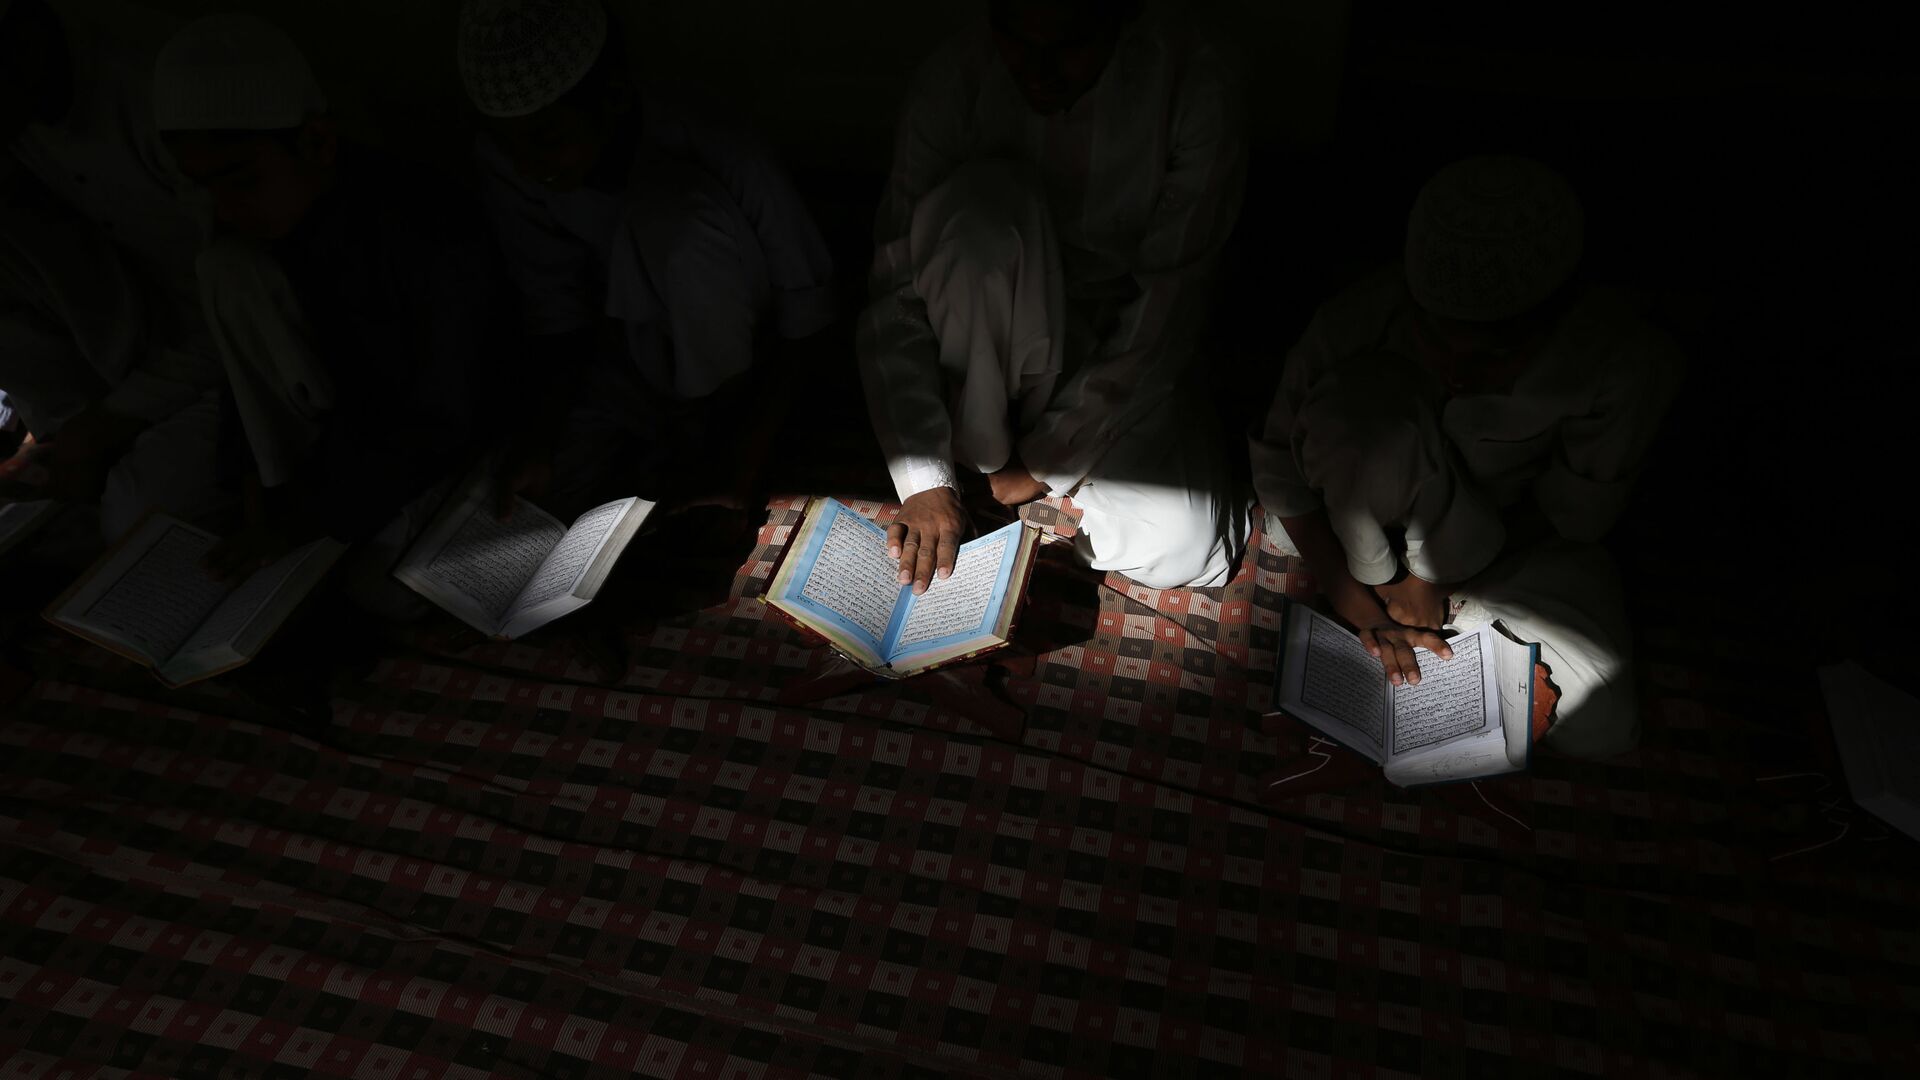 Indian Muslims  read the holy Quran at a mosque in Allahabad, Uttar Pradesh state, India, Tuesday, March 28, 2017 - Sputnik International, 1920, 22.07.2021